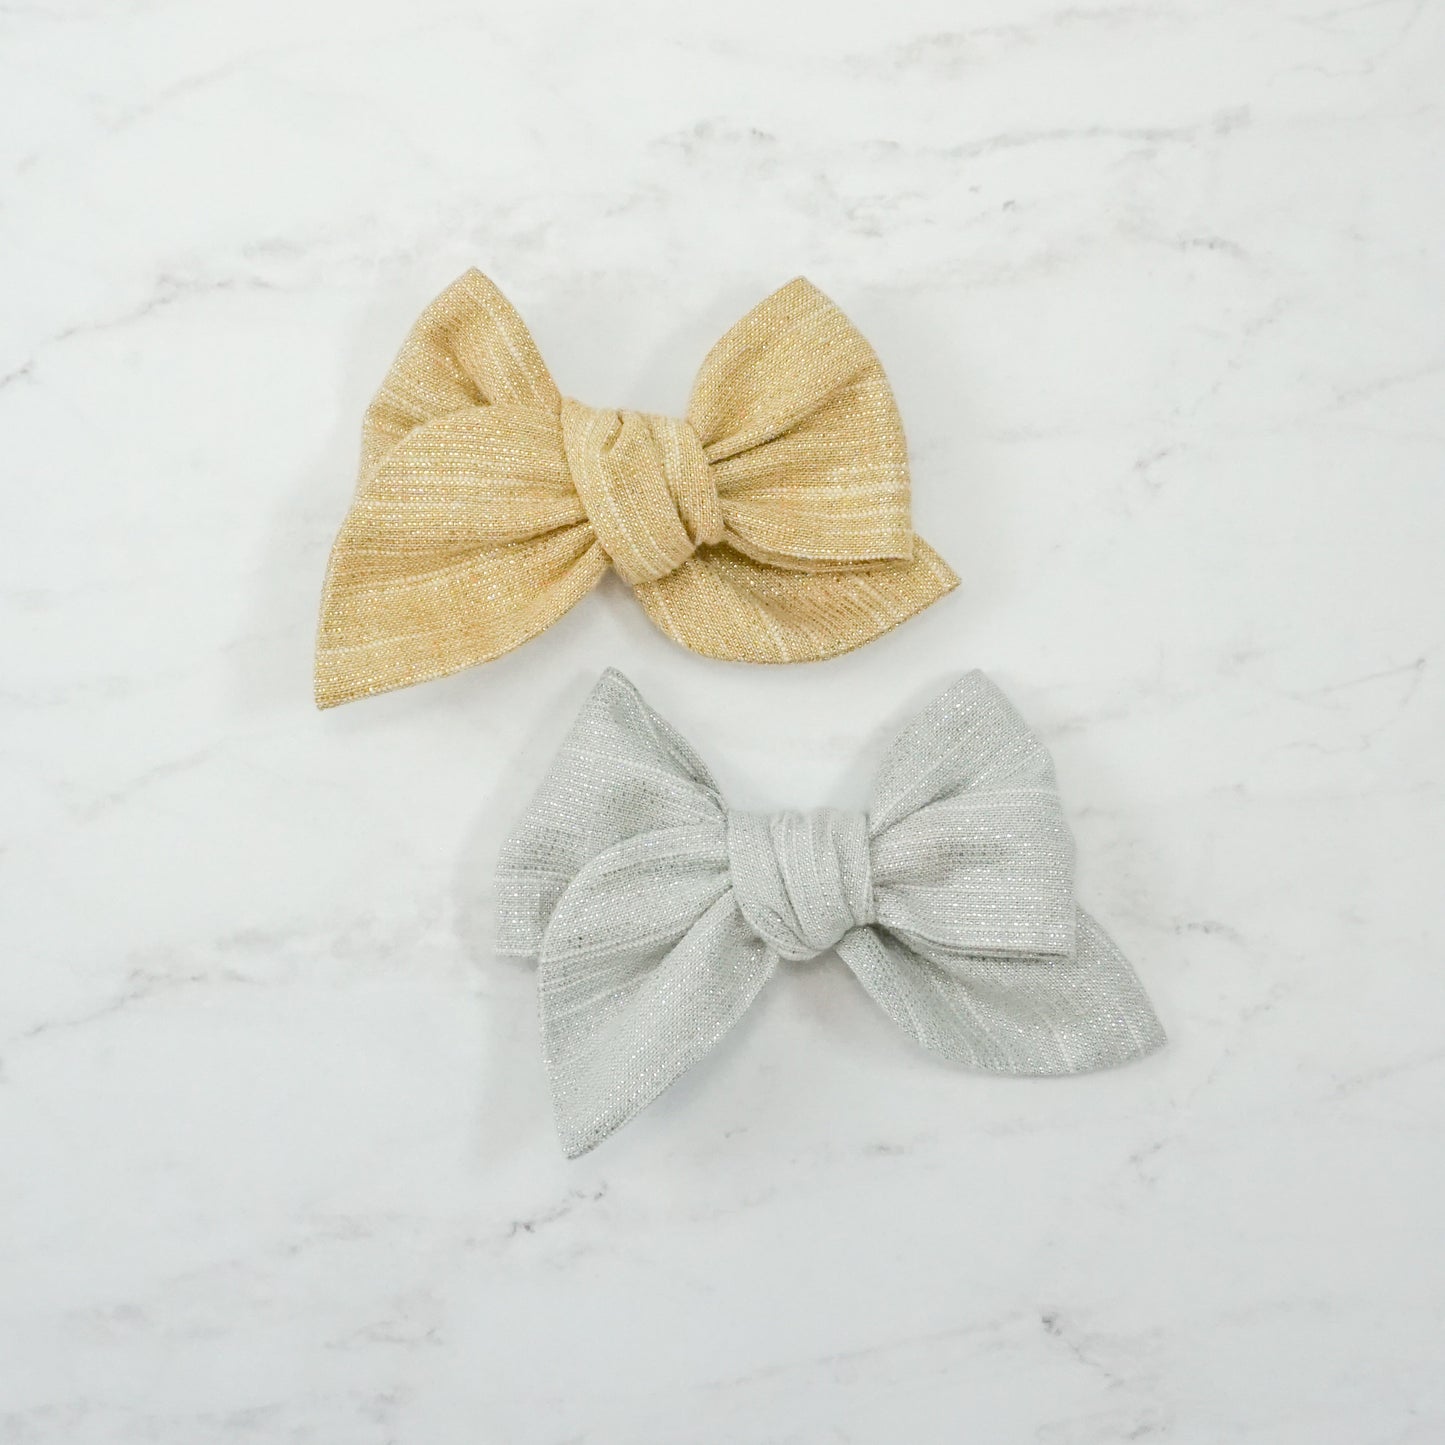 Handtied Fabric Bow - Sparkly Silver